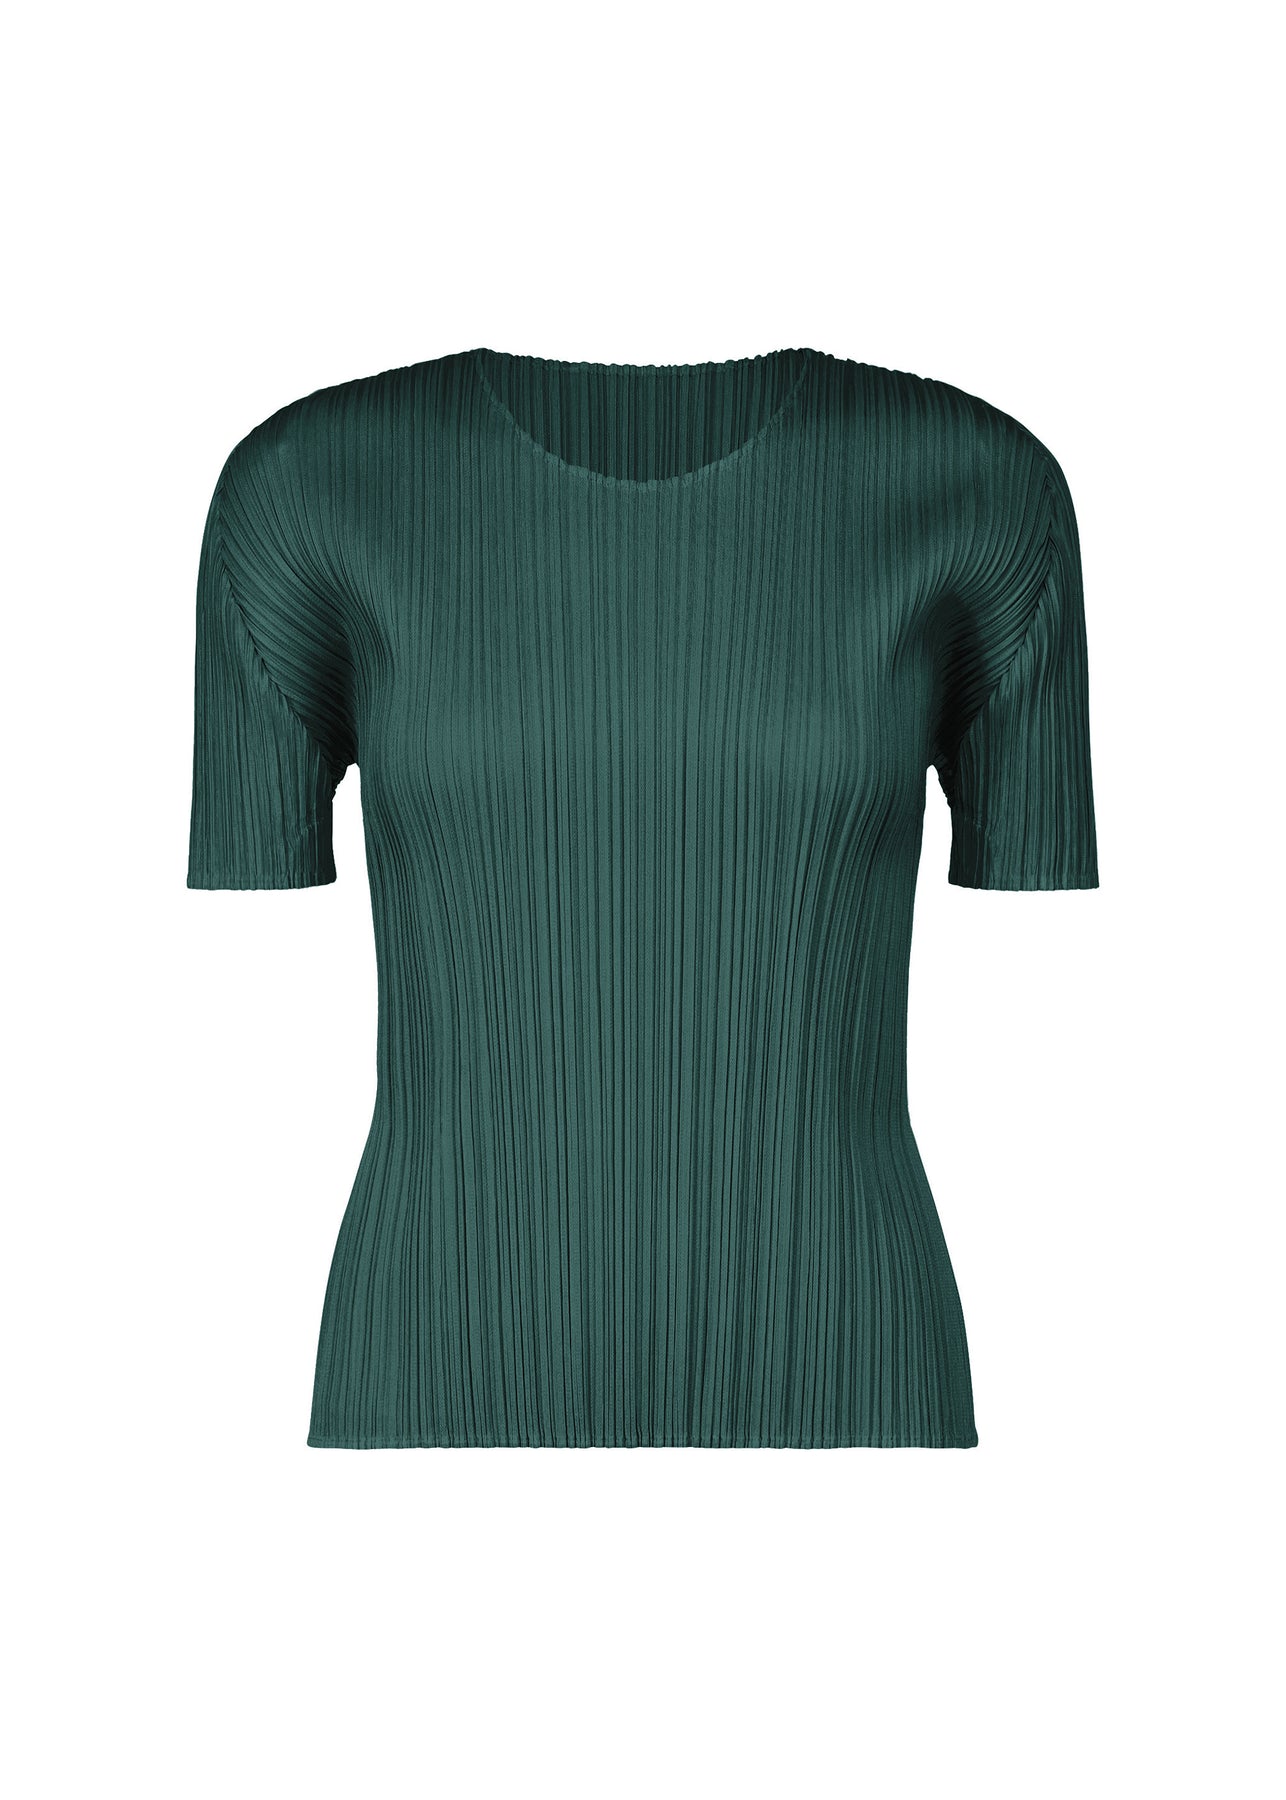 MONTHLY COLORS : APRIL TOP | The official ISSEY MIYAKE ONLINE